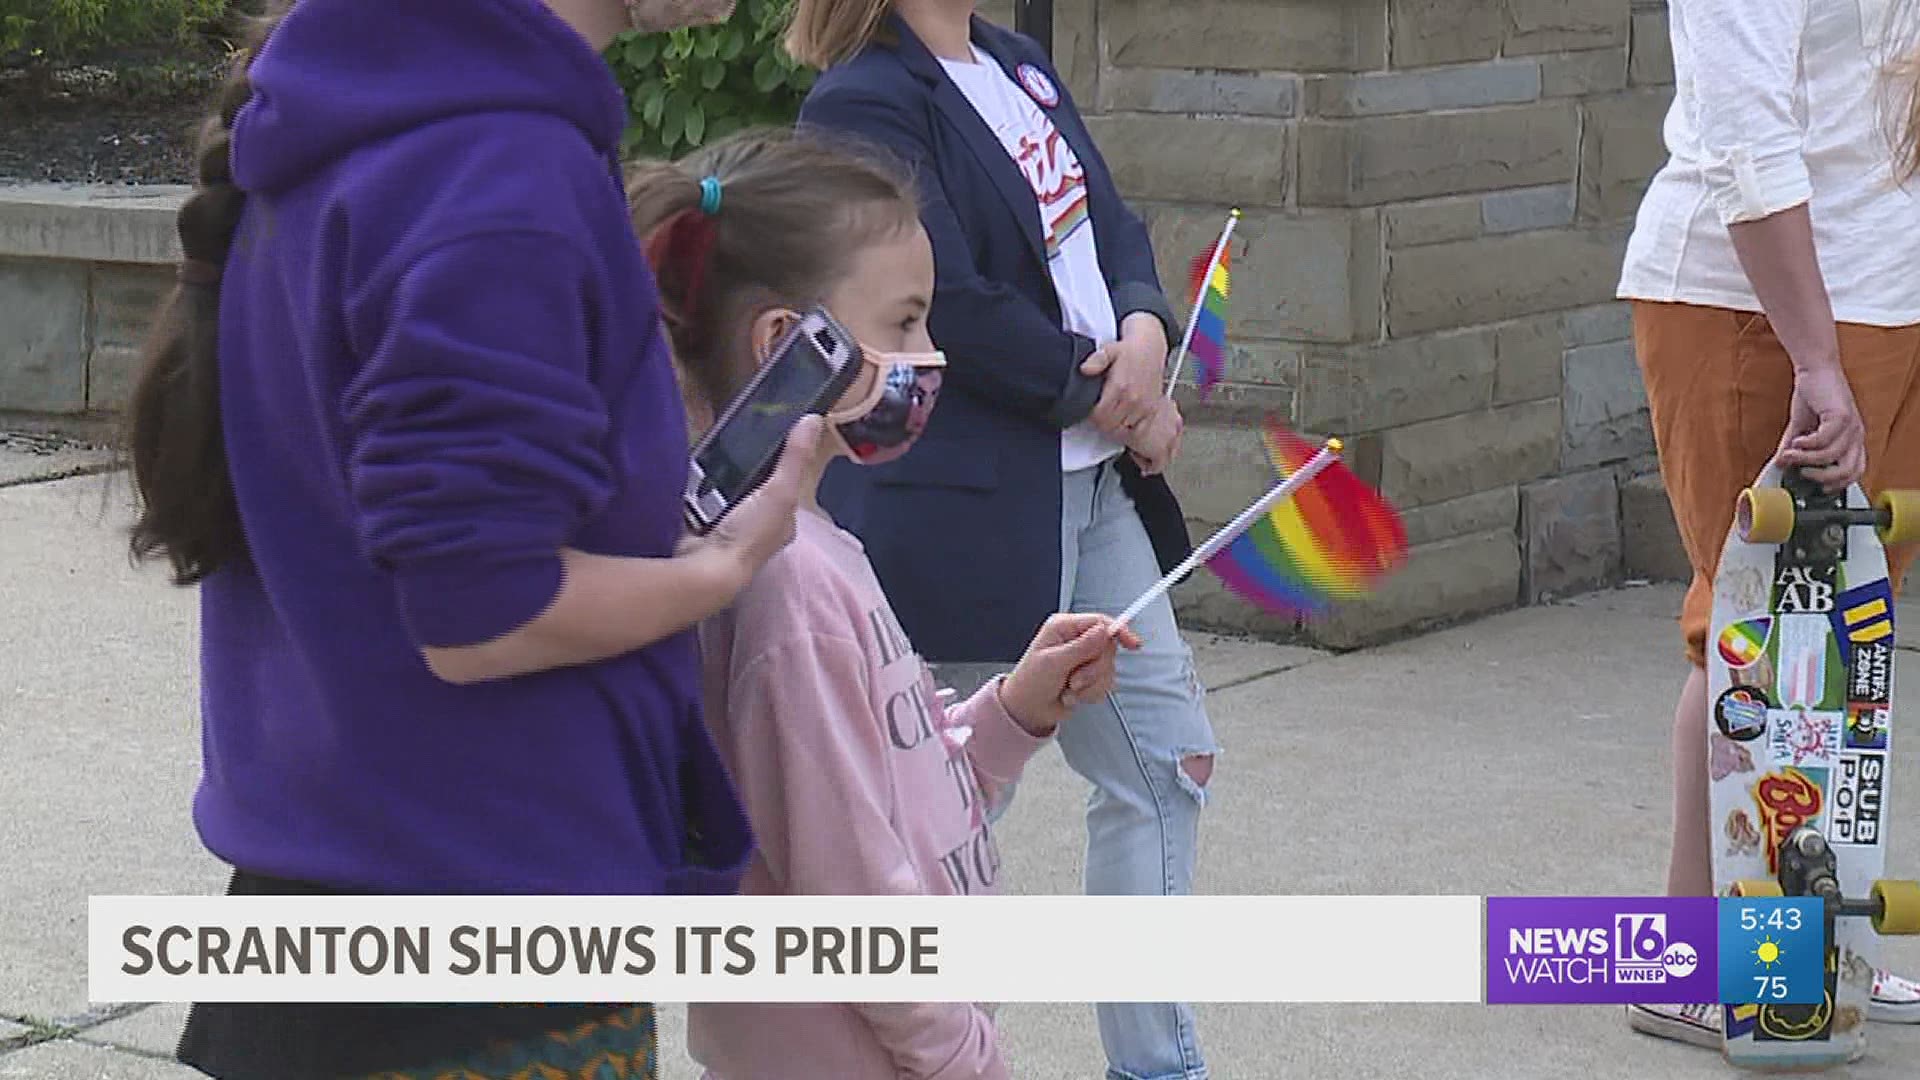 June 1 marks the start of Pride month a celebration of the LGBTQ community. Tuesday morning, the Pride flag was hoisted at Scranton City Hall.